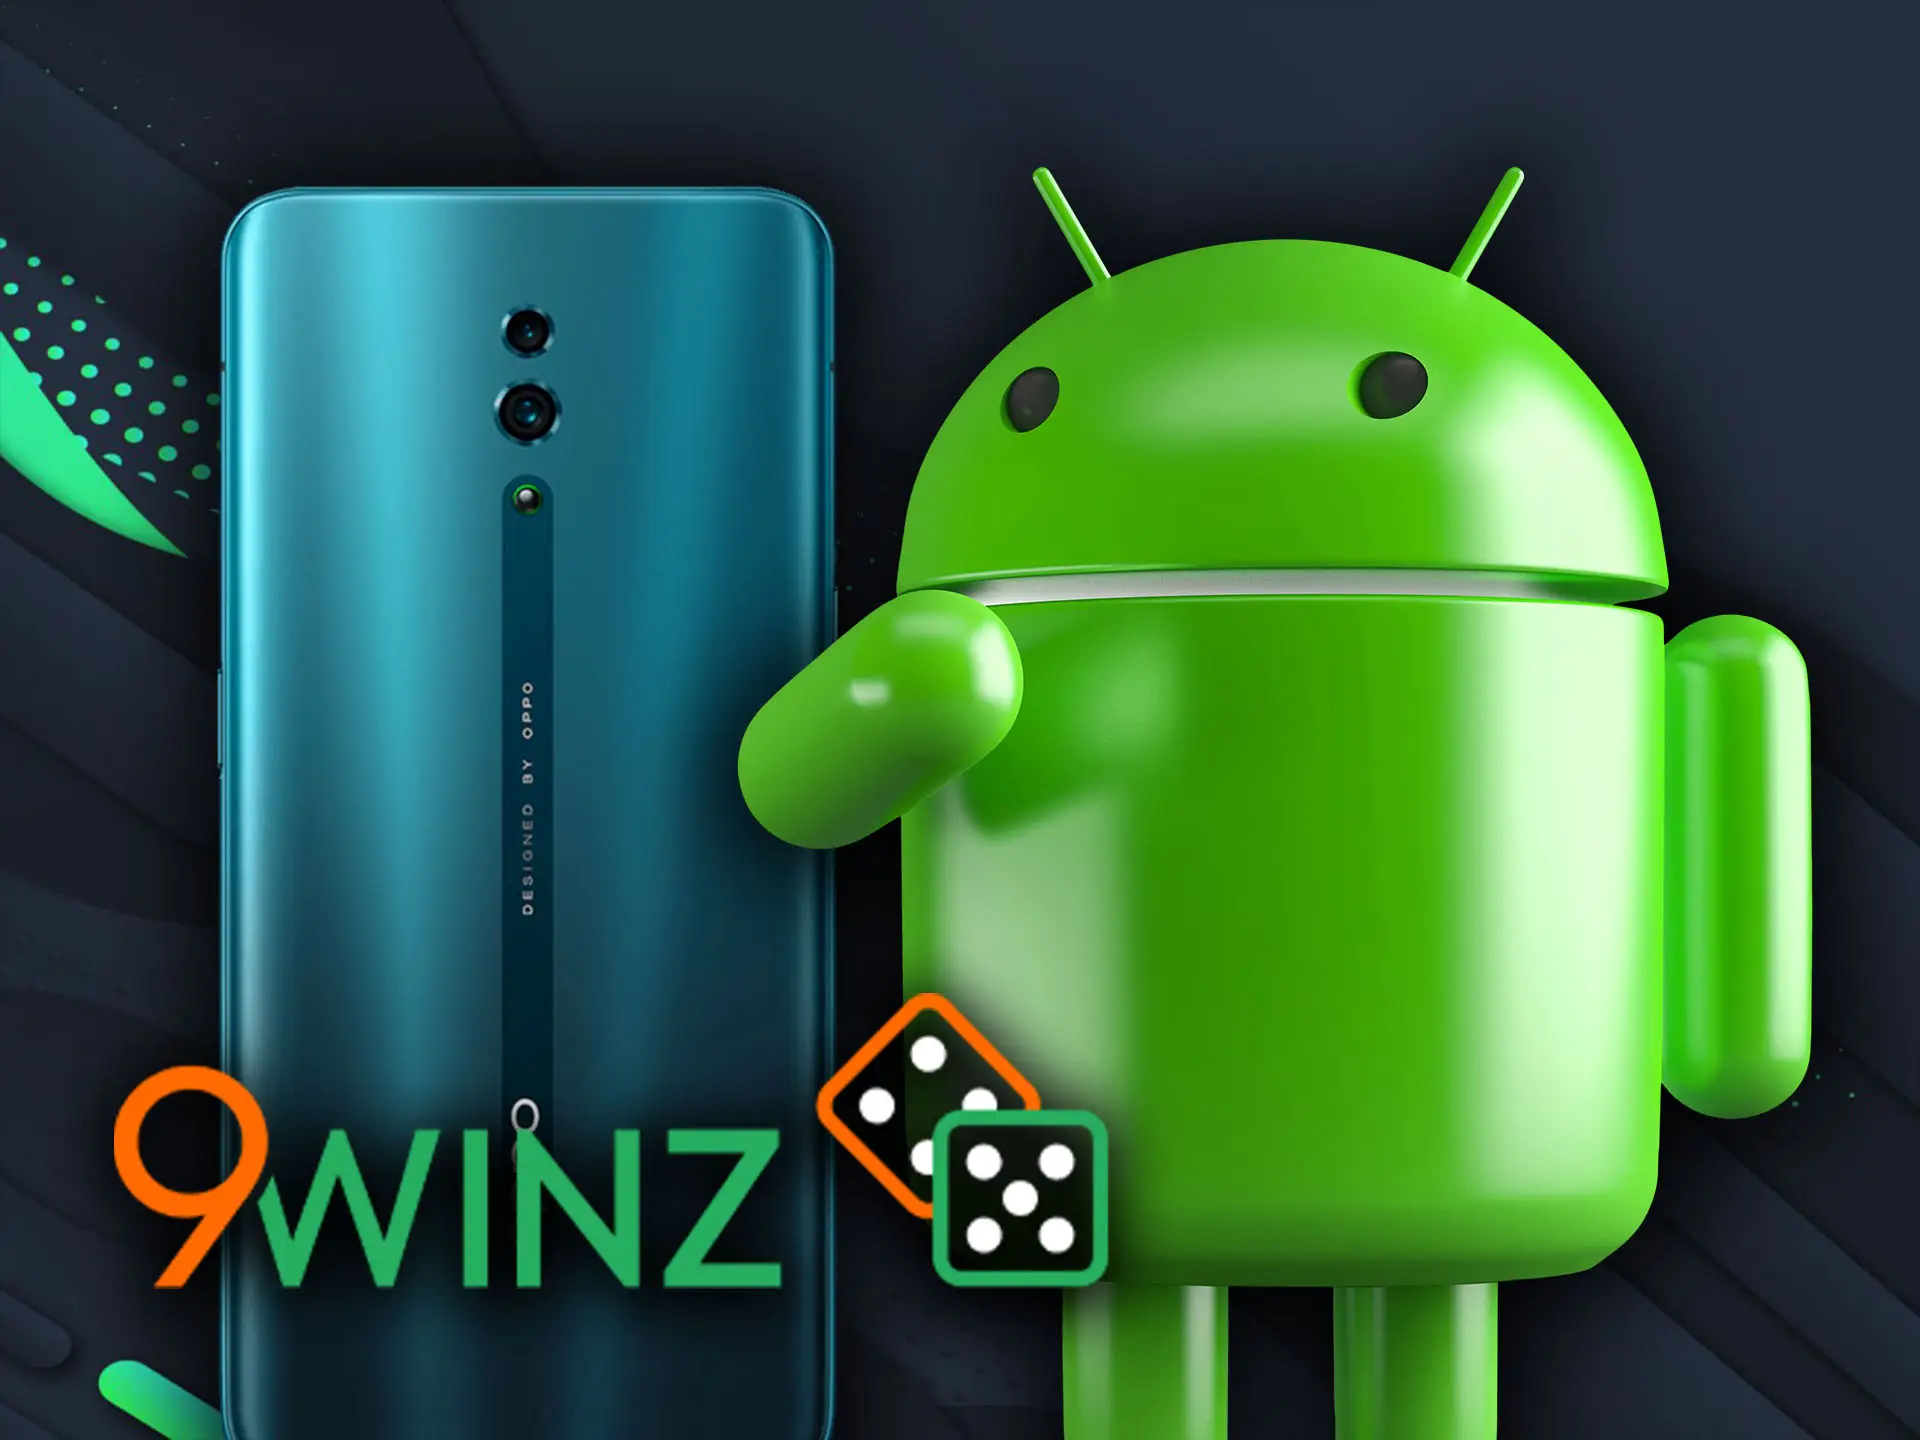 Download and Install 9winz app android on any compatible Android device.